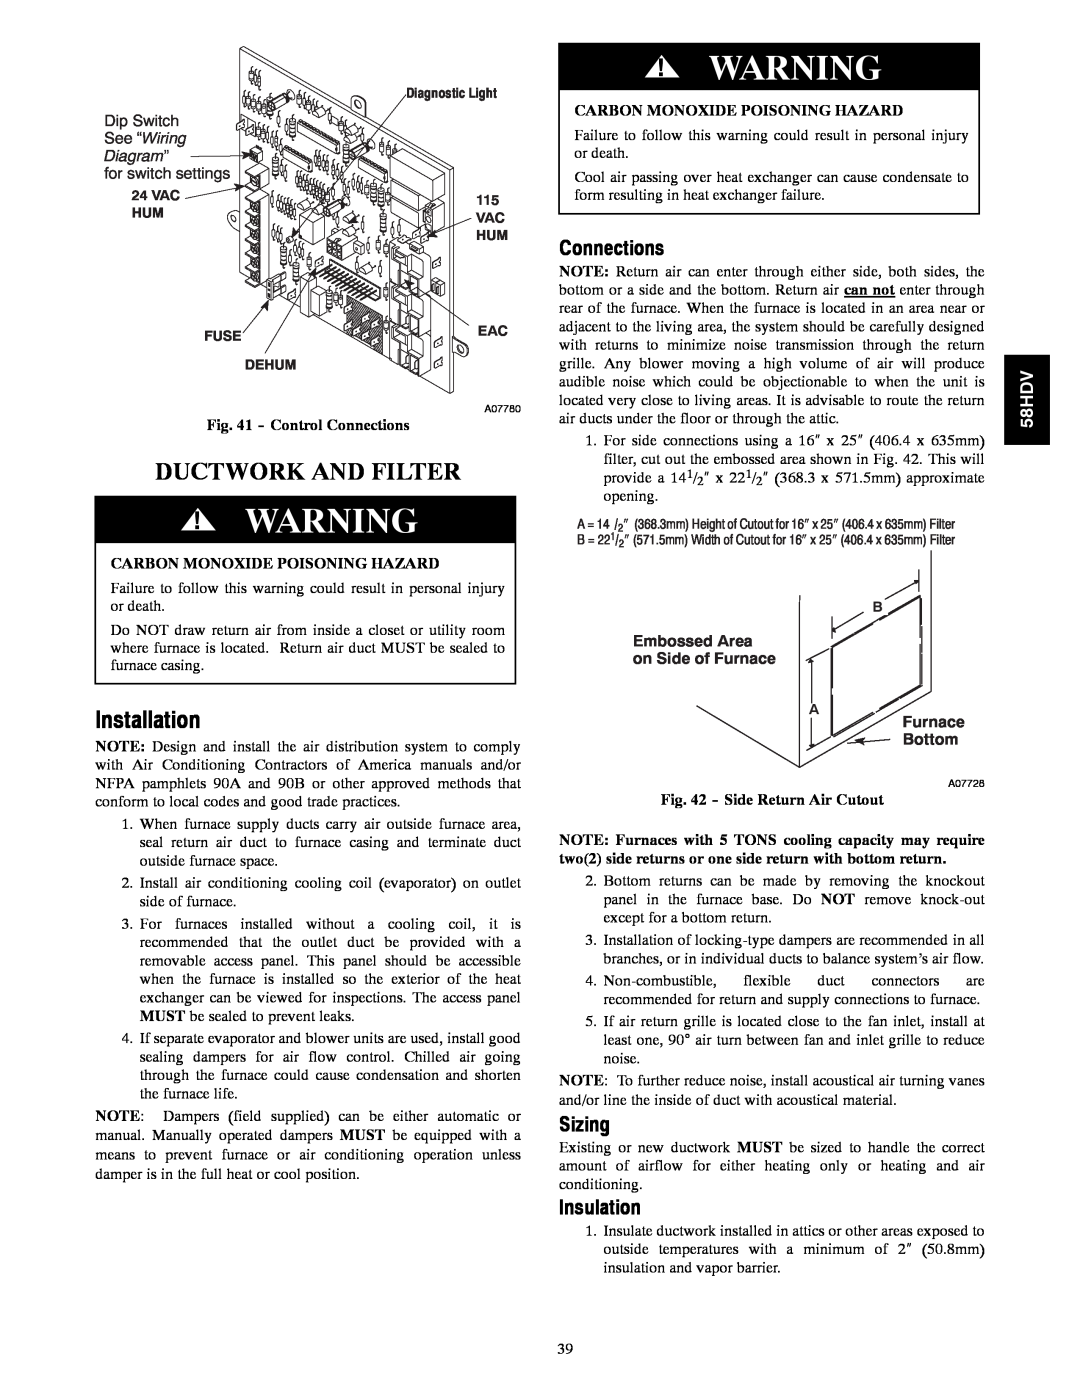 Carrier 58HDV Ductwork And Filter, Installation, Connections, Sizing, Insulation, See “Wiring Diagram” 